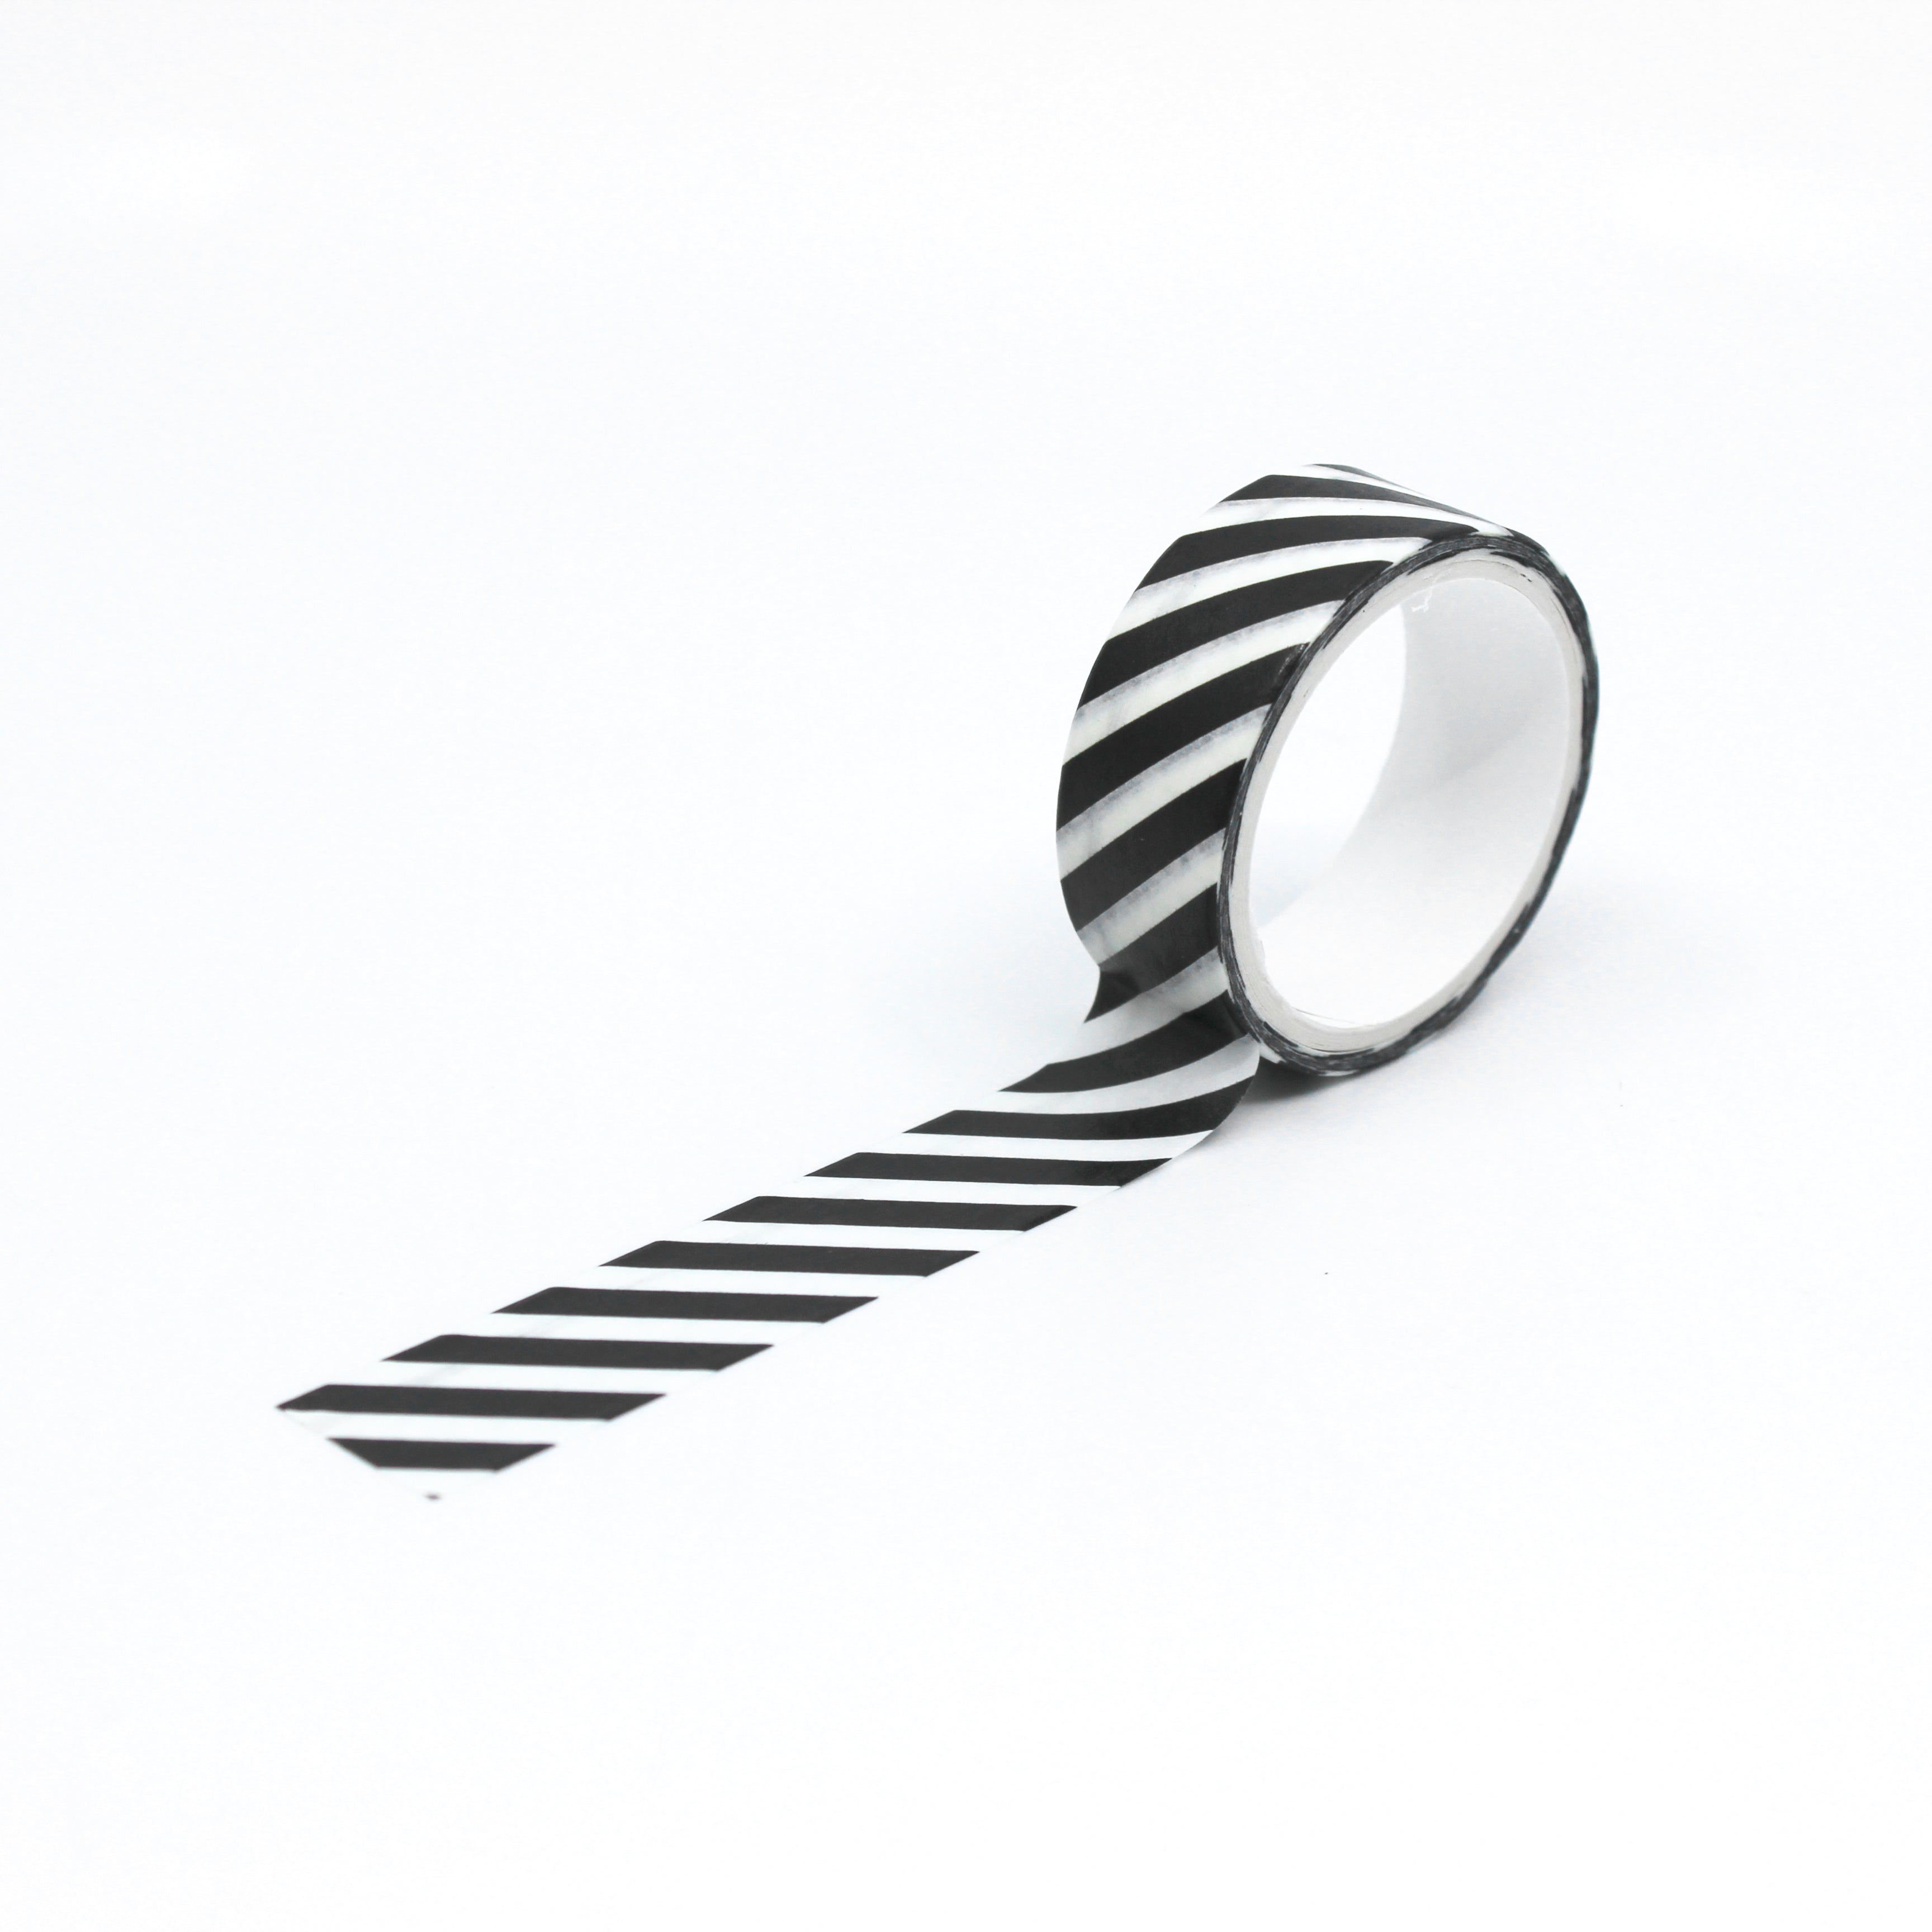 Add a touch of modern sophistication with our black and white striped washi tape, featuring a sleek and stylish pattern of diagonal stripes. This tape is sold at BBB Supplies Craft Shop.